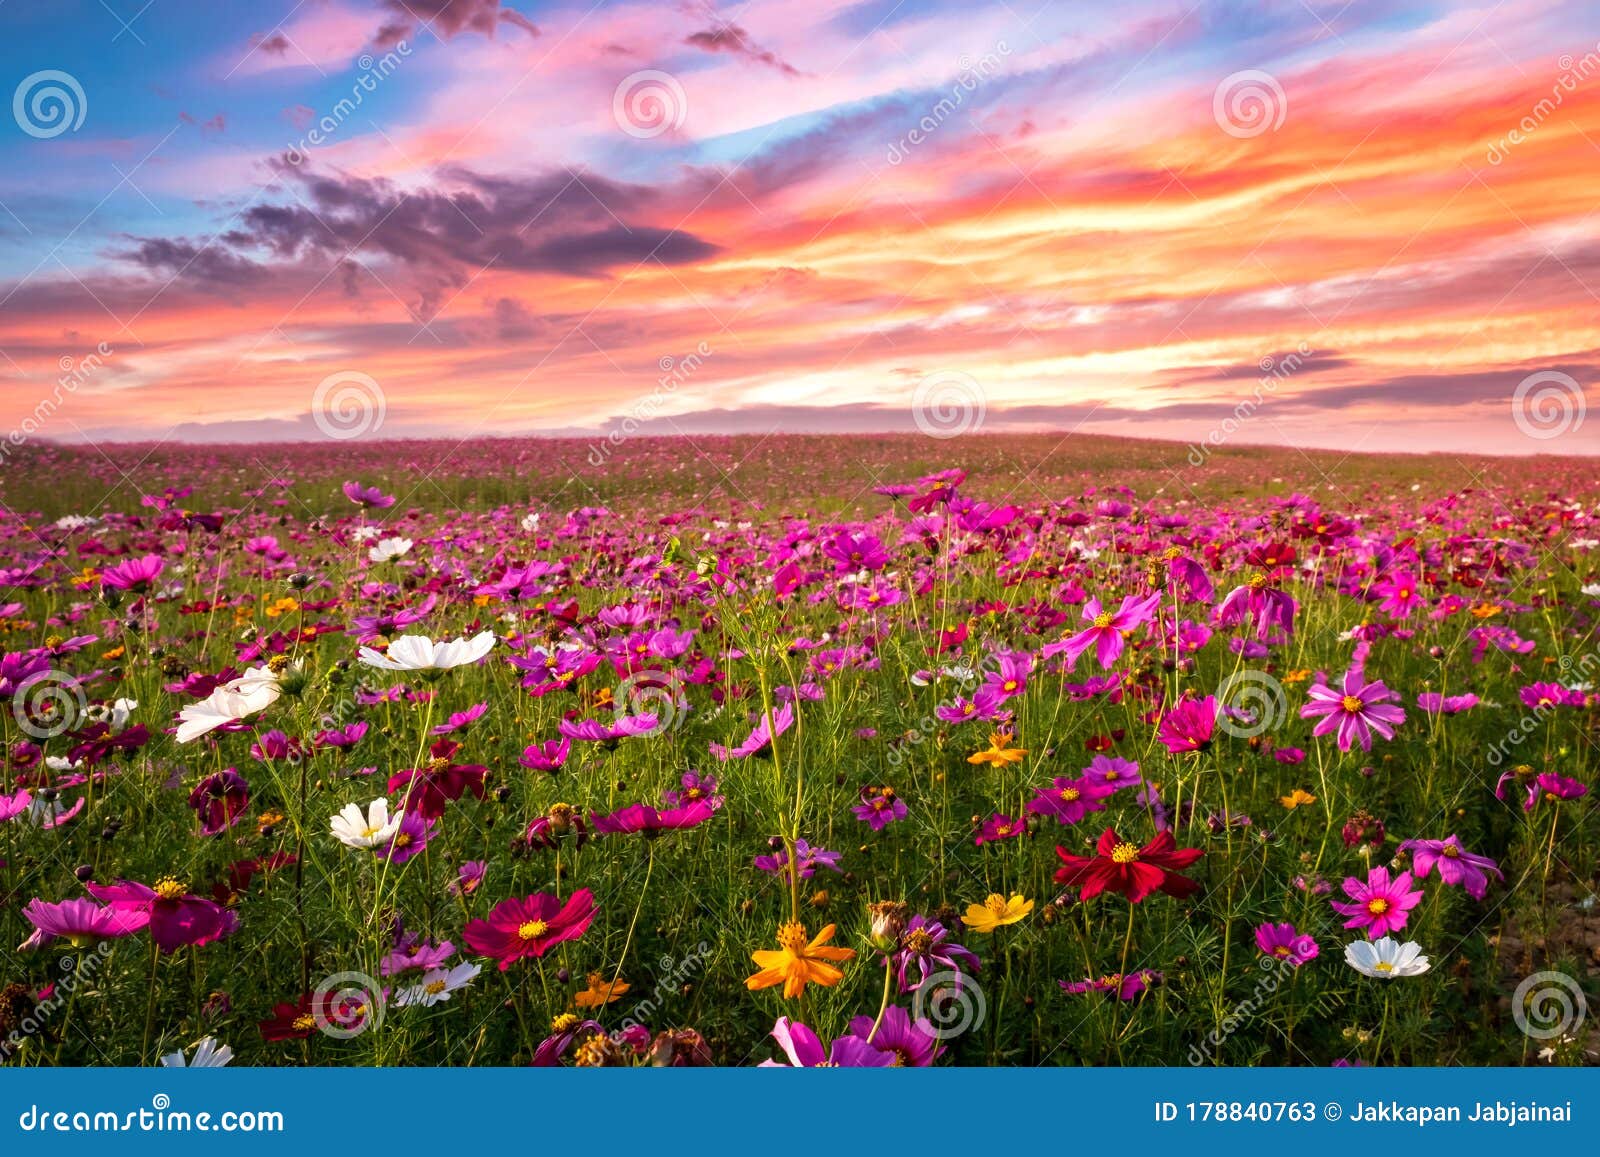 Field Of Flowers Wallpaper 58 images